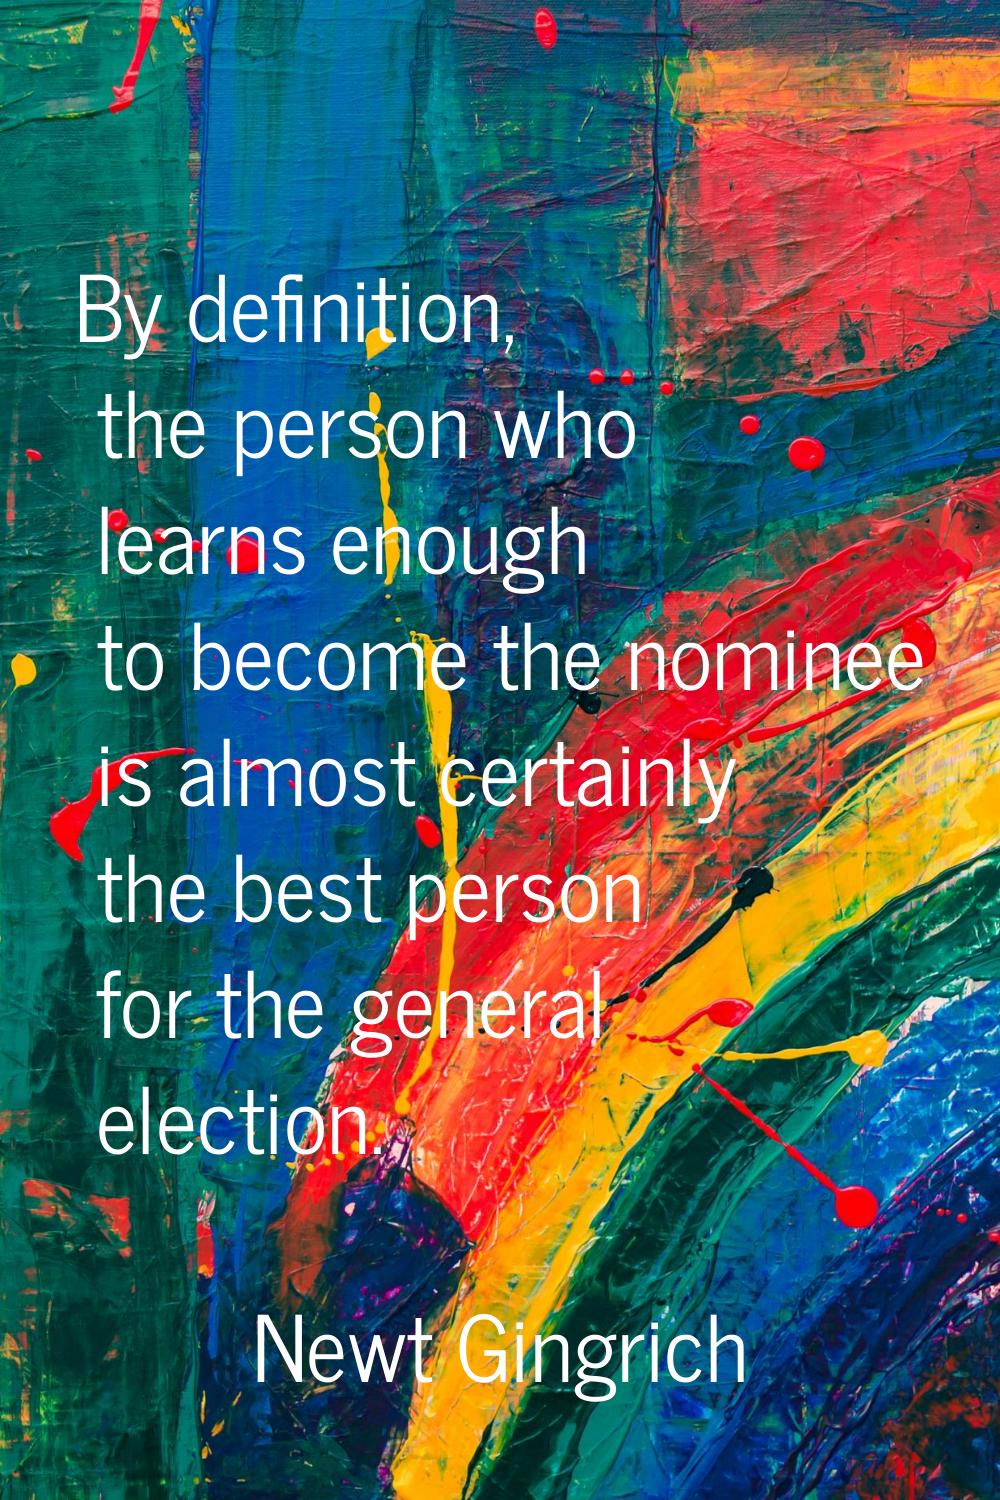 By definition, the person who learns enough to become the nominee is almost certainly the best pers